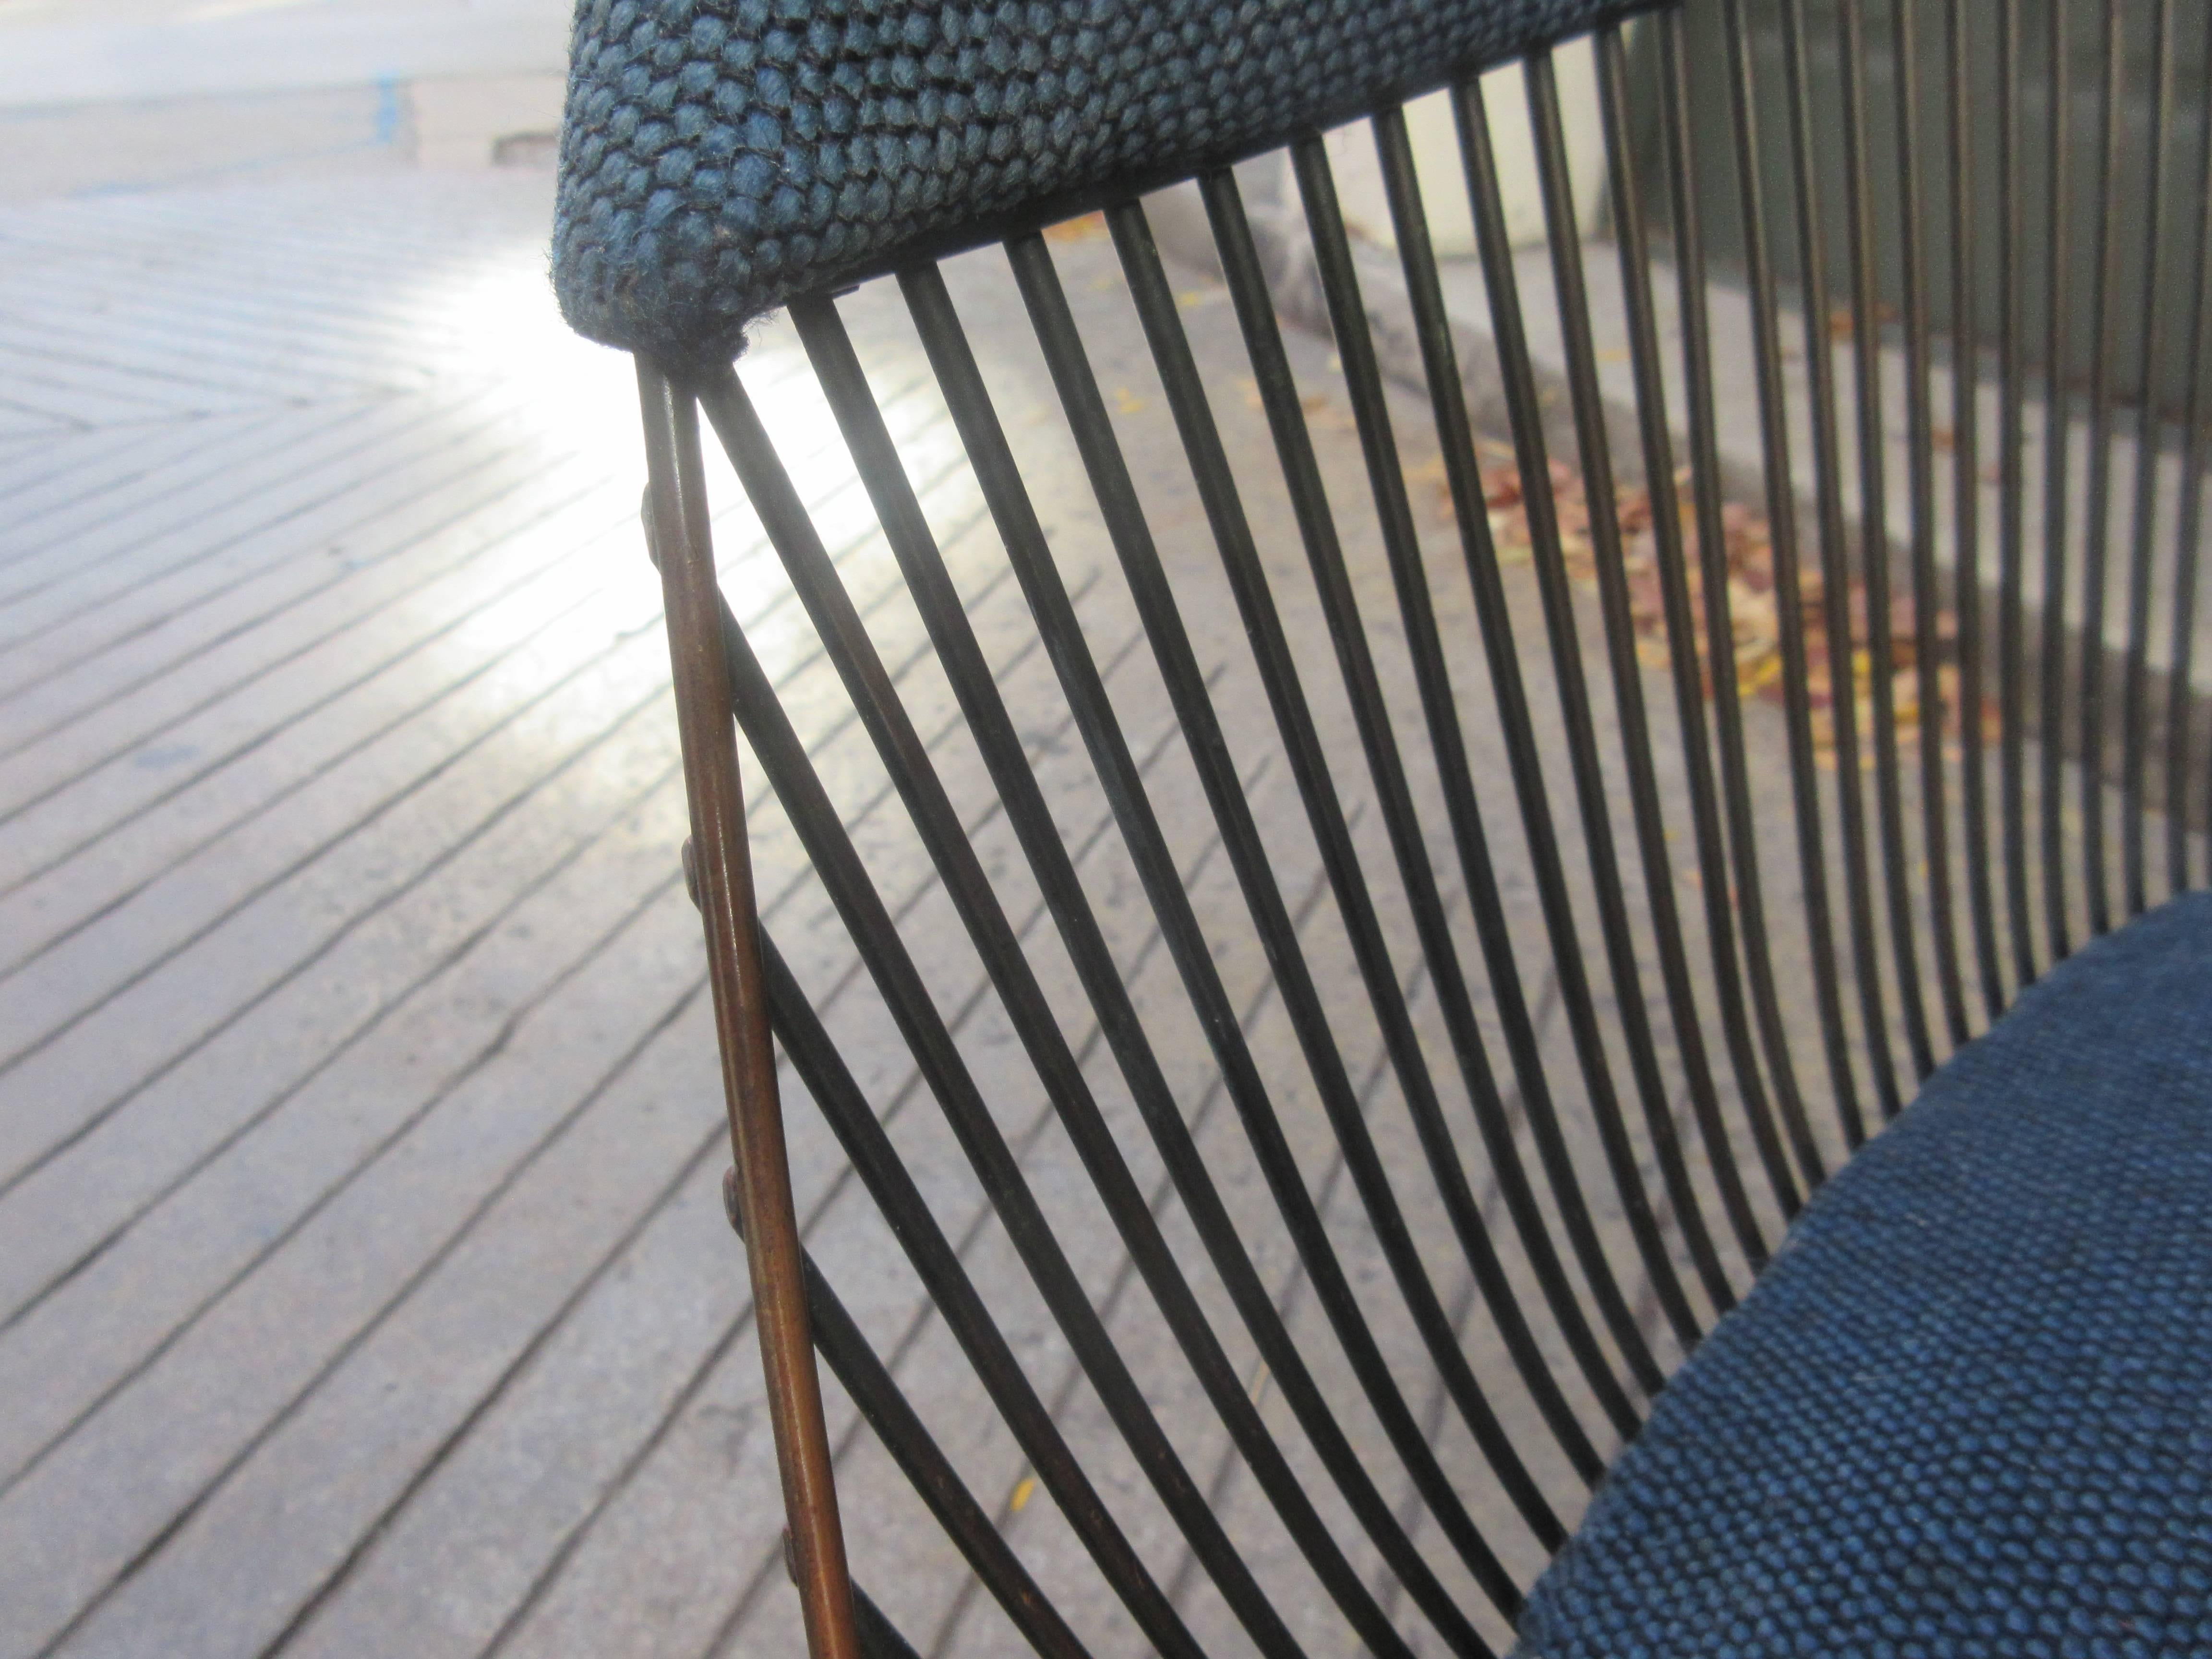 First year Production of the Platner Dining Chairs bought in 1966 by a Philadelphia designer. We purchased them from her son. The original steel grey blue fabric remains but is in need of replacement. The bronze finish steel is in excellent